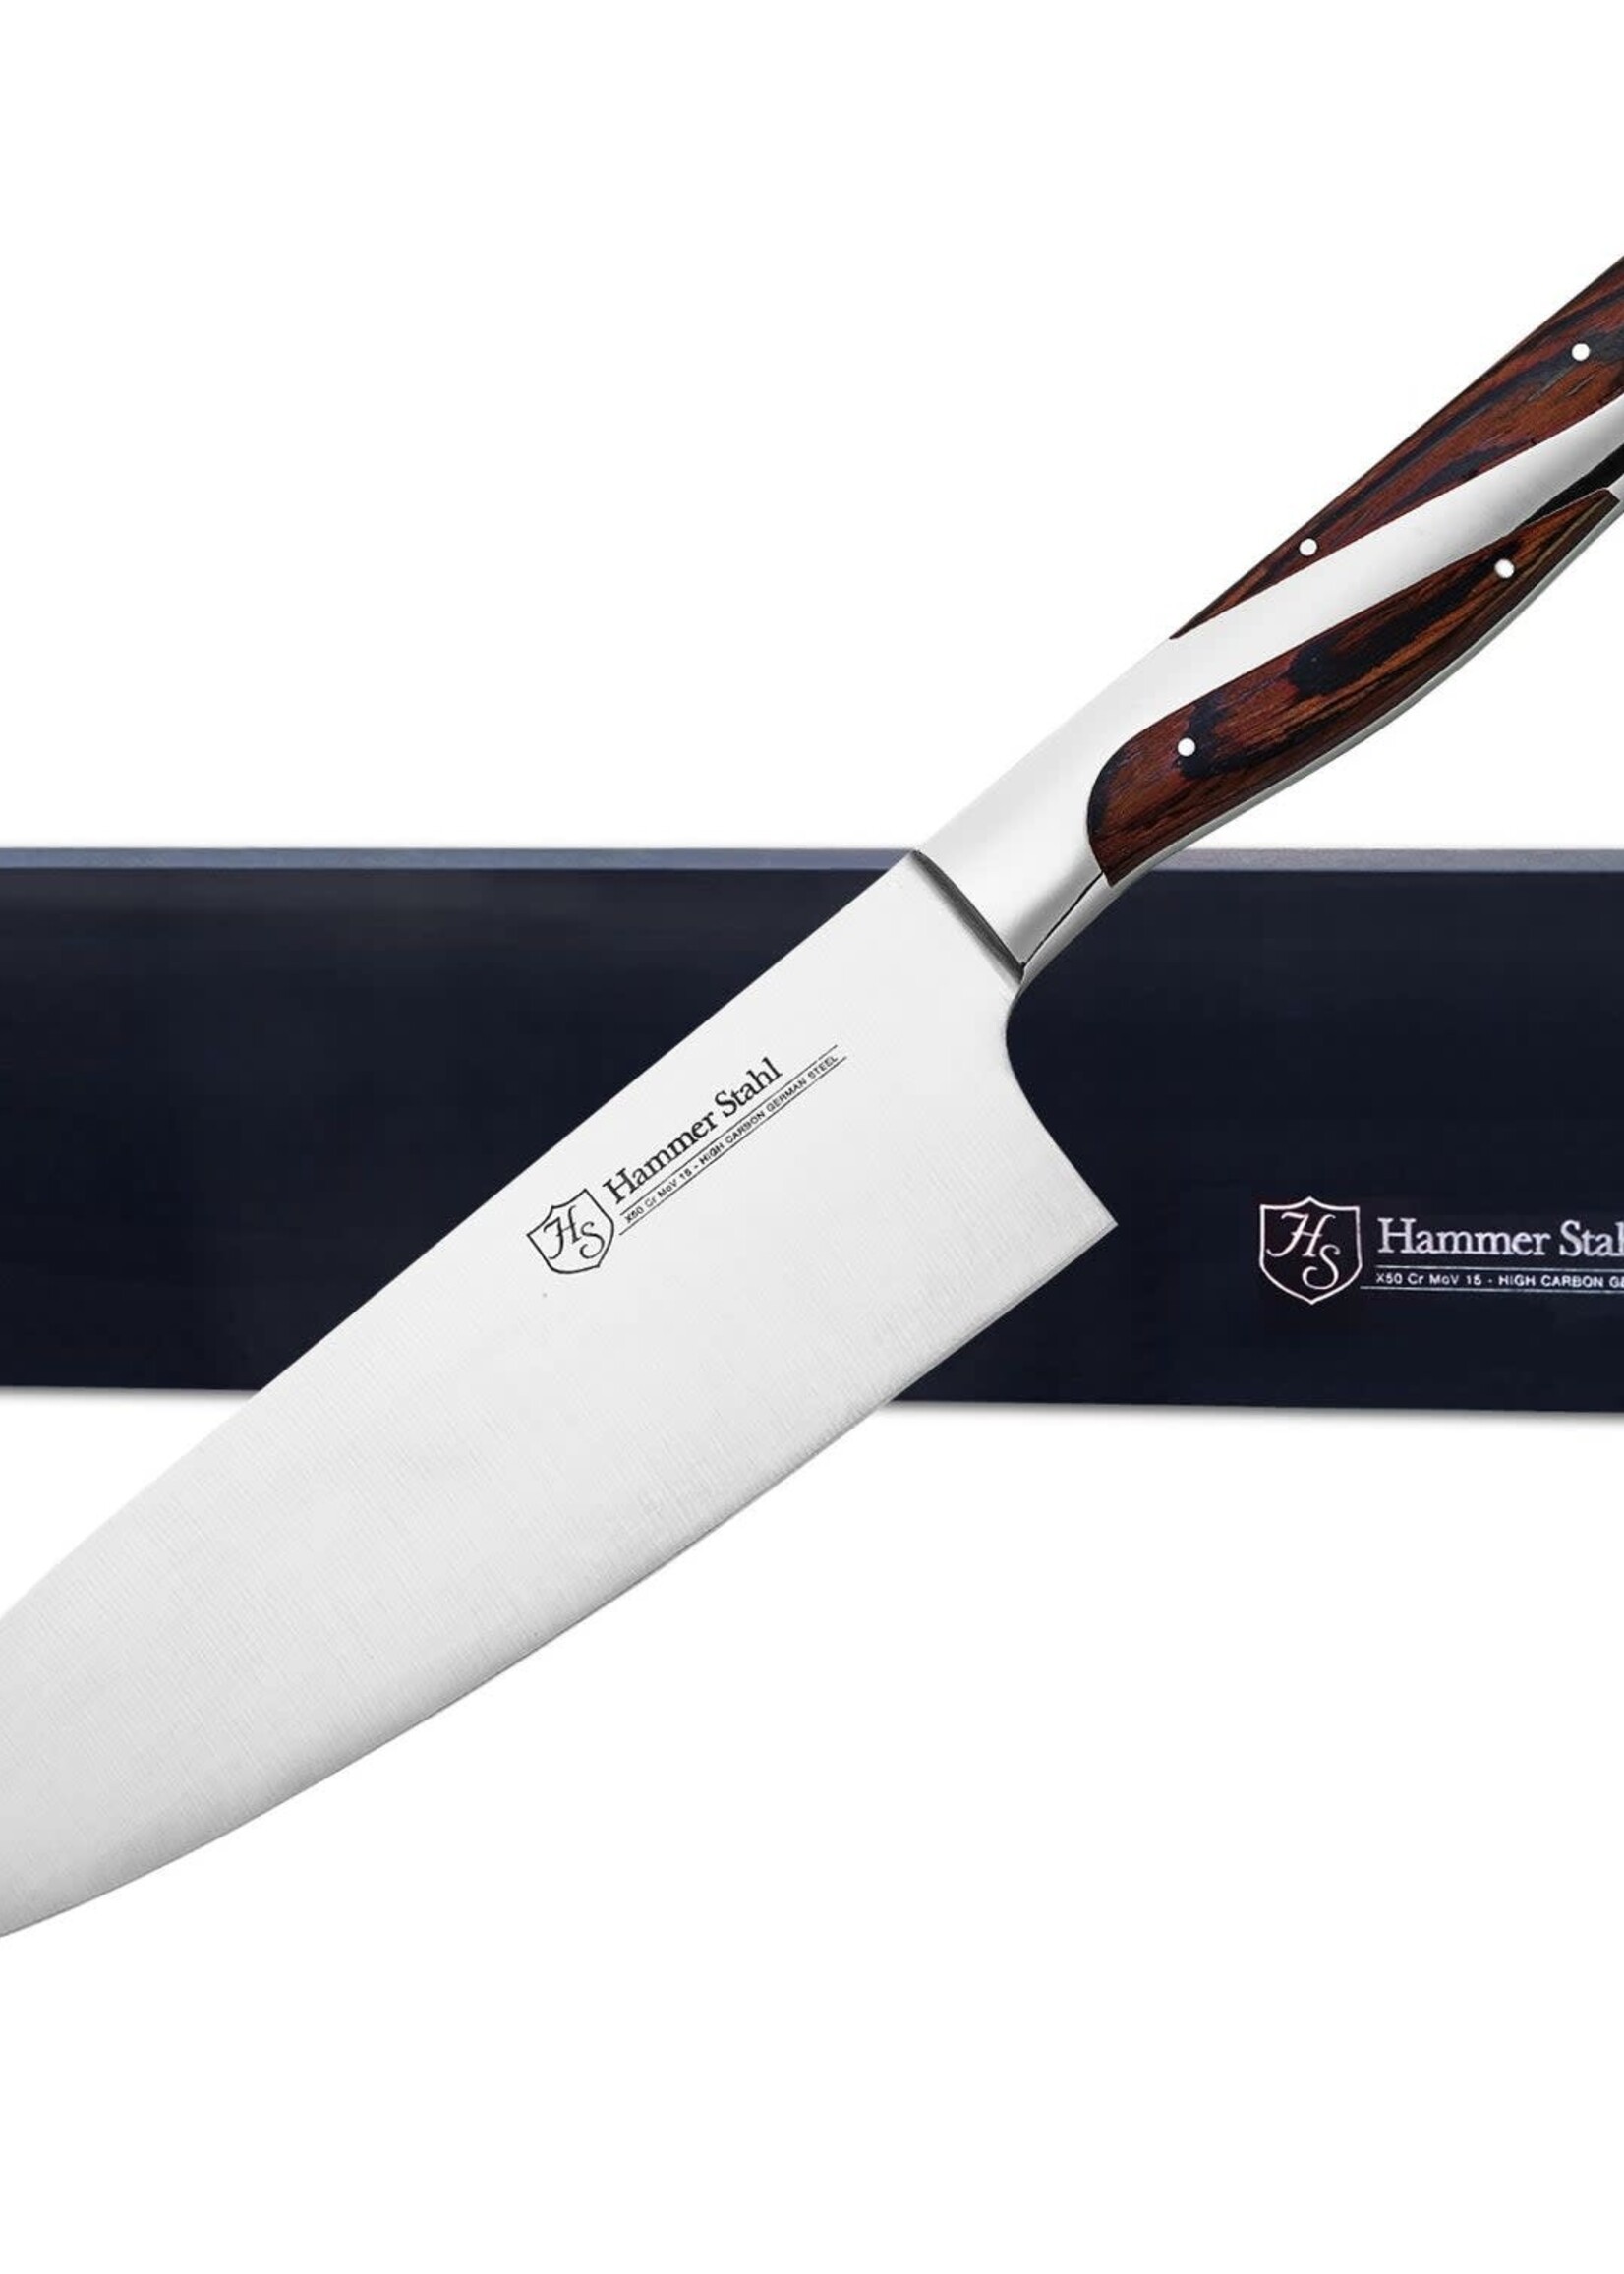 Hammerstahl Heritage Steel 6" Chef Featured Knife of 2022